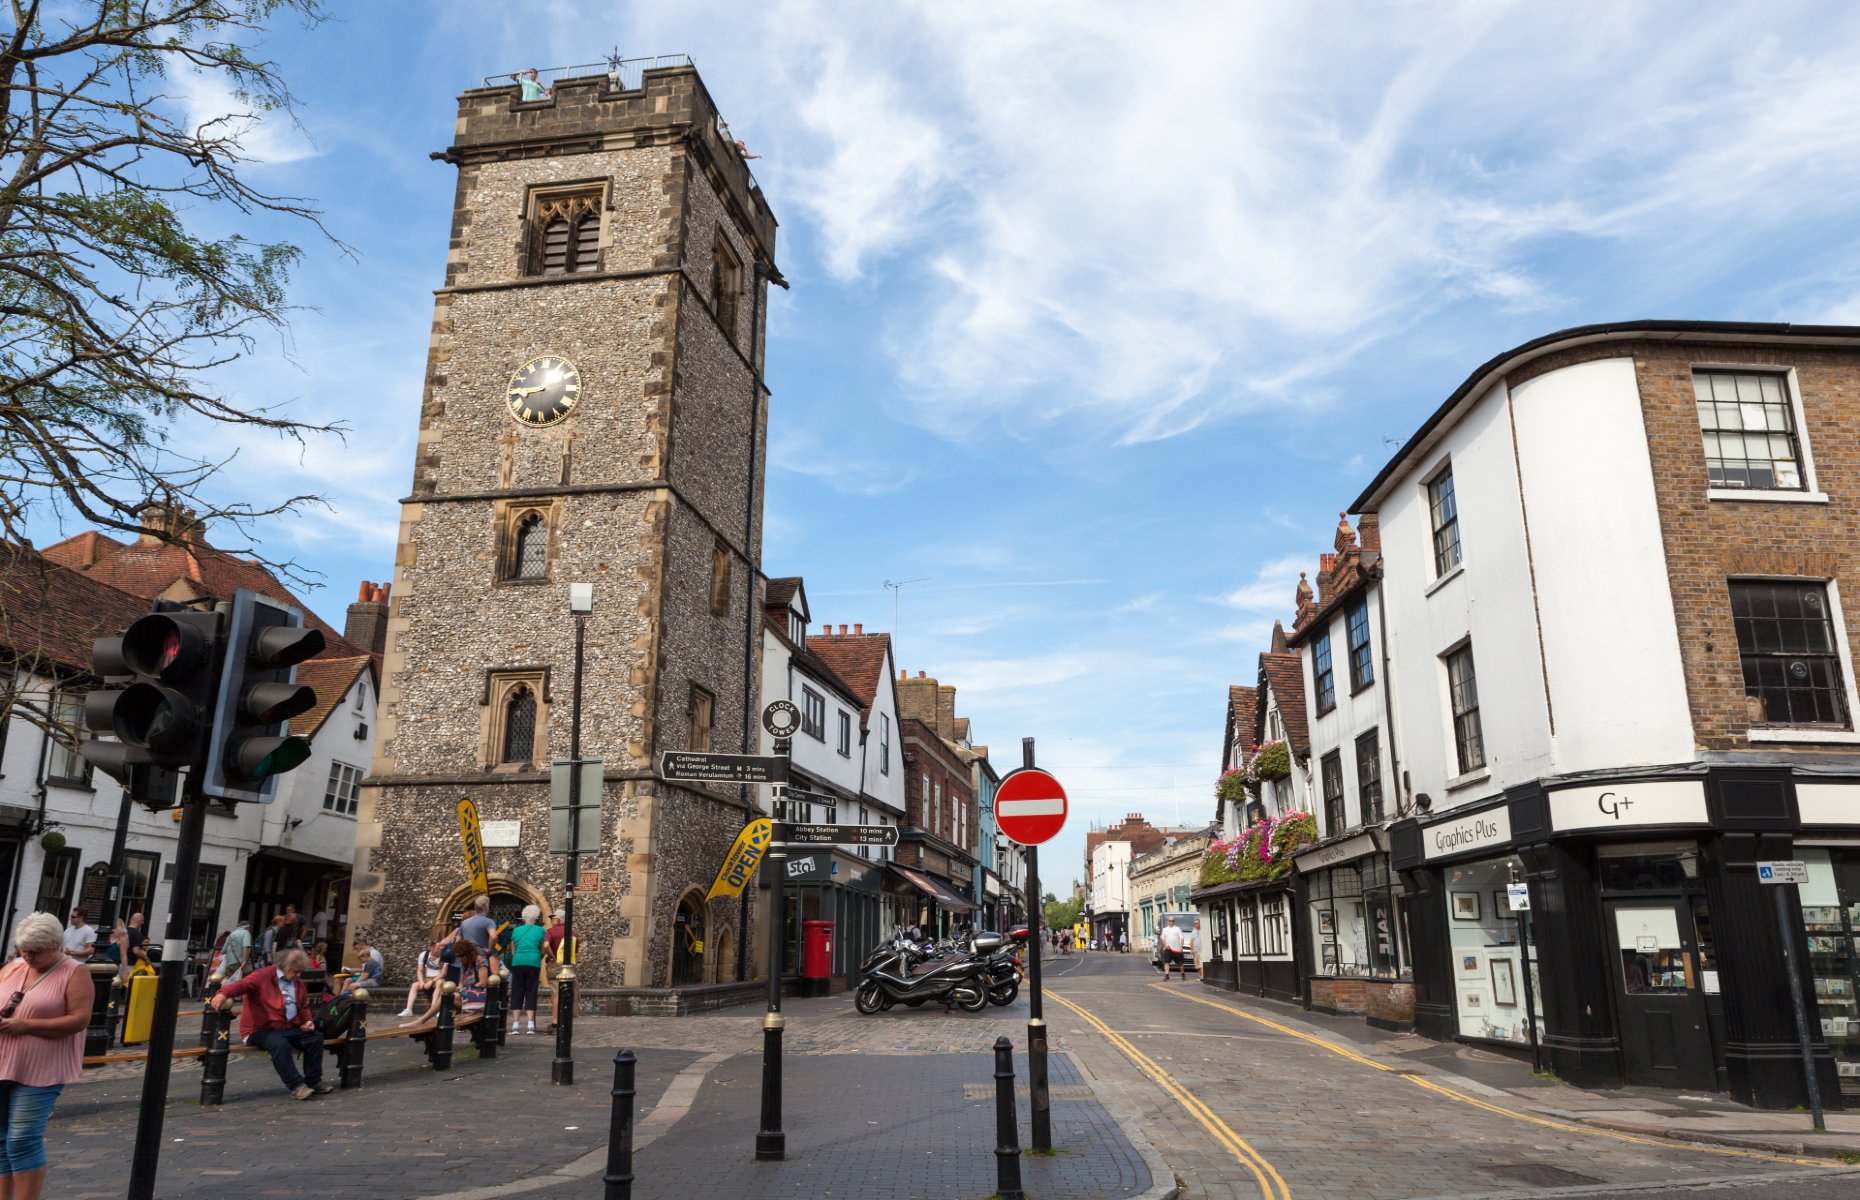 St Albans Clock Tower (Image: AC Manley/Shutterstock)